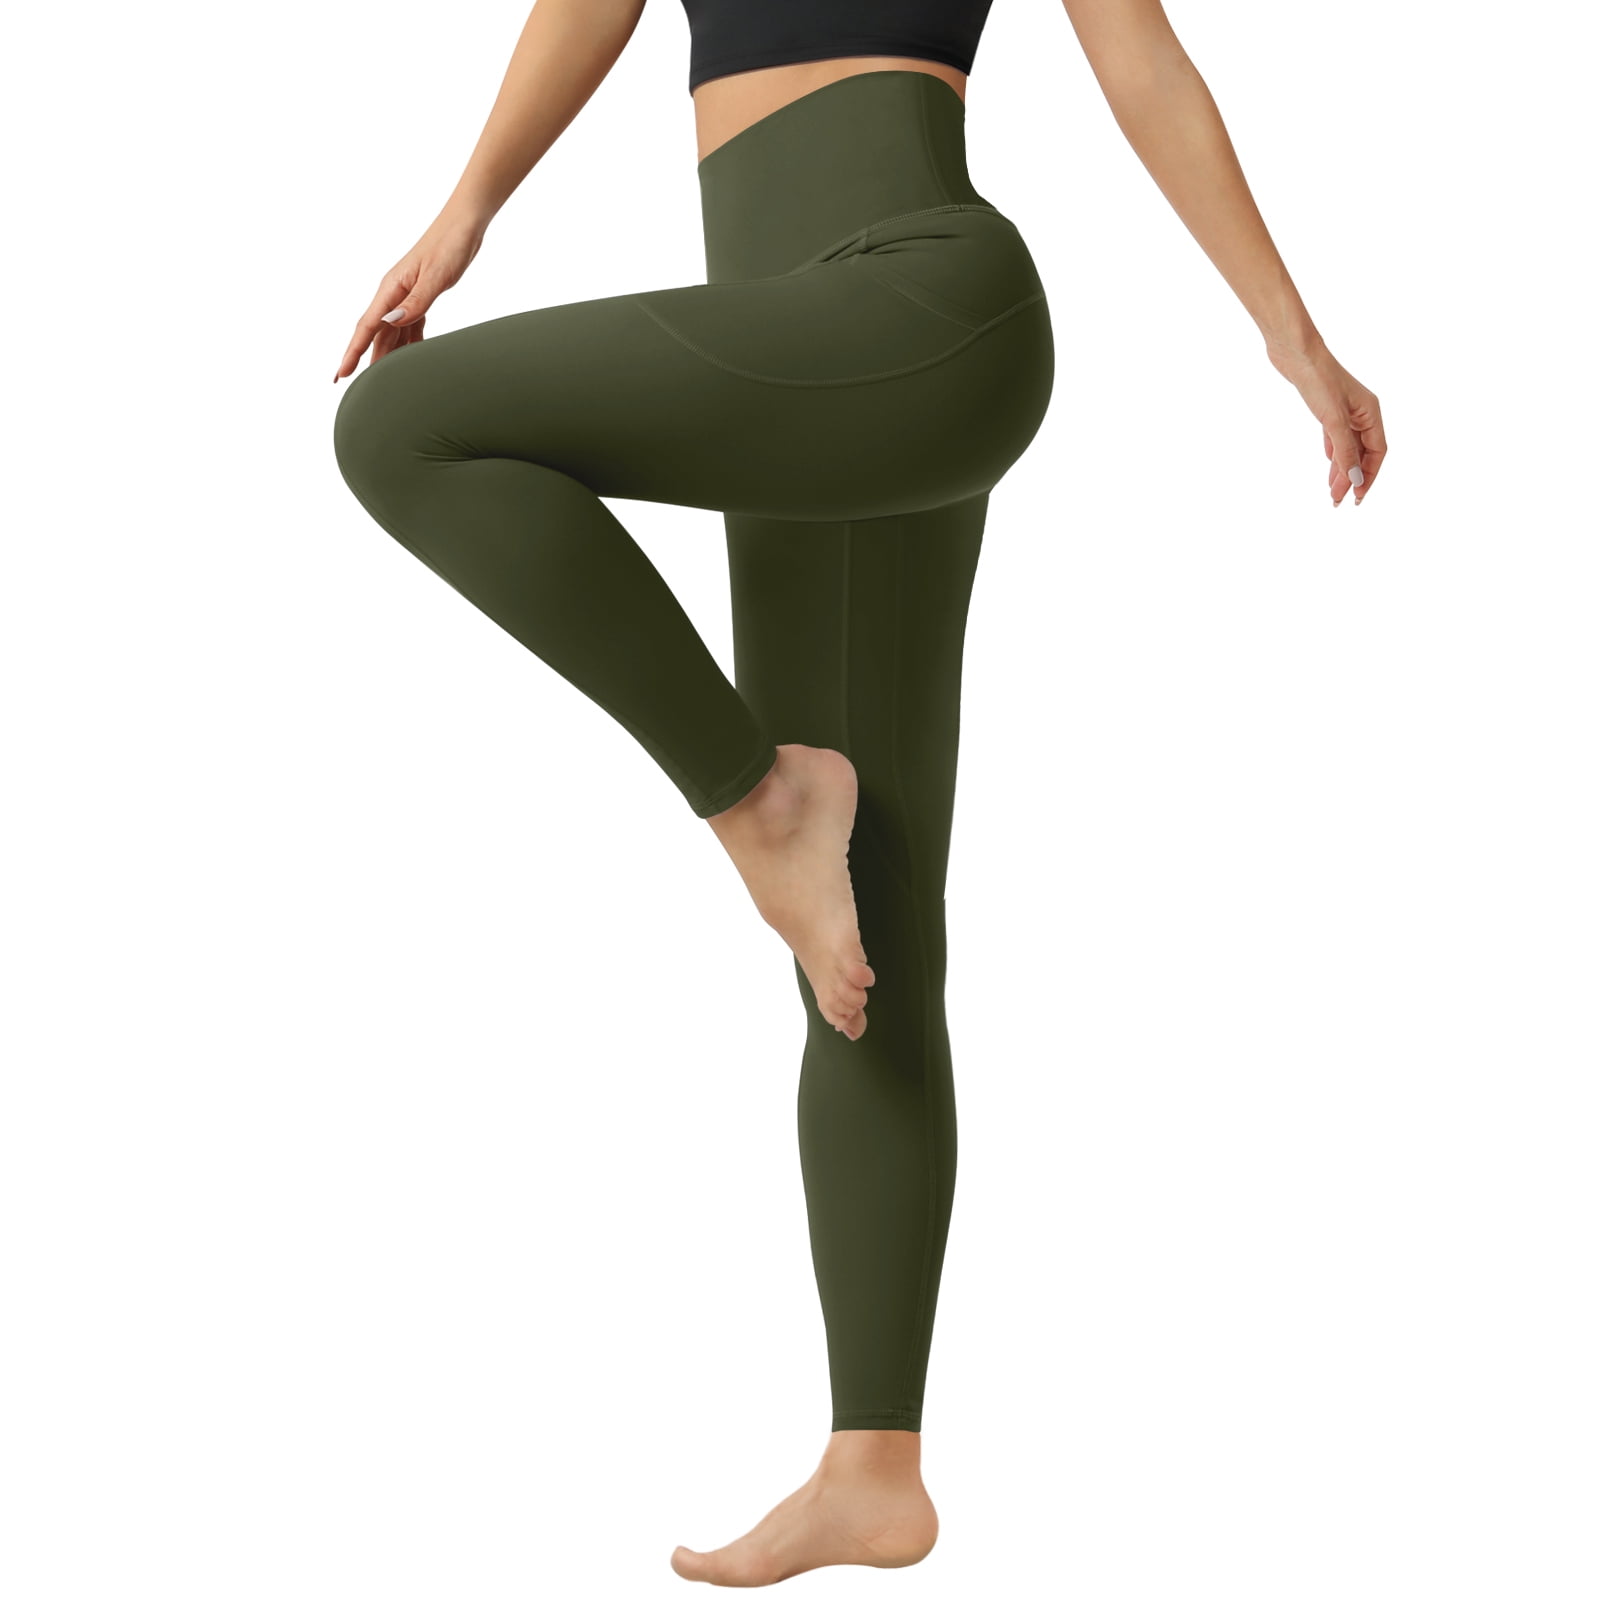 Womens High Waist Out Pocket Yoga Pants Streamlined Design Workout Fitness Sports Gym Running Leggings